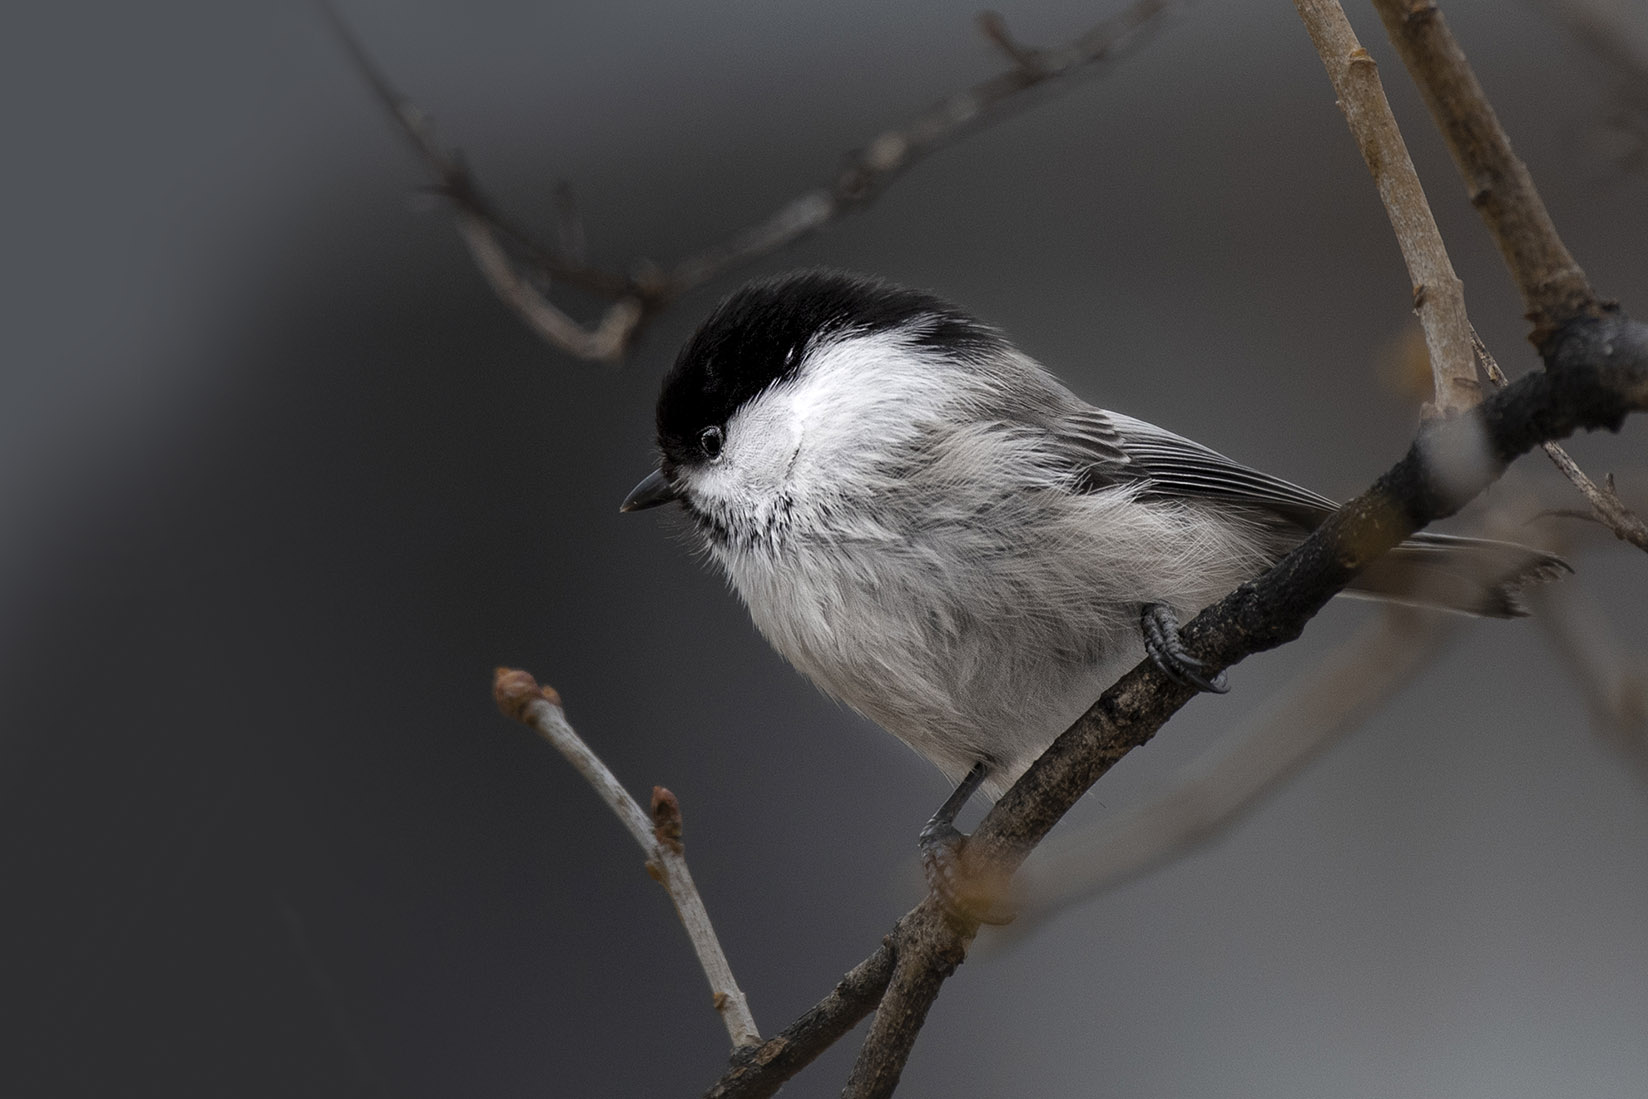 The willow tit has become one of the leading figures in biodiversity. The bird has declined in Finland in recent years. Photo: Vilma Issakainen